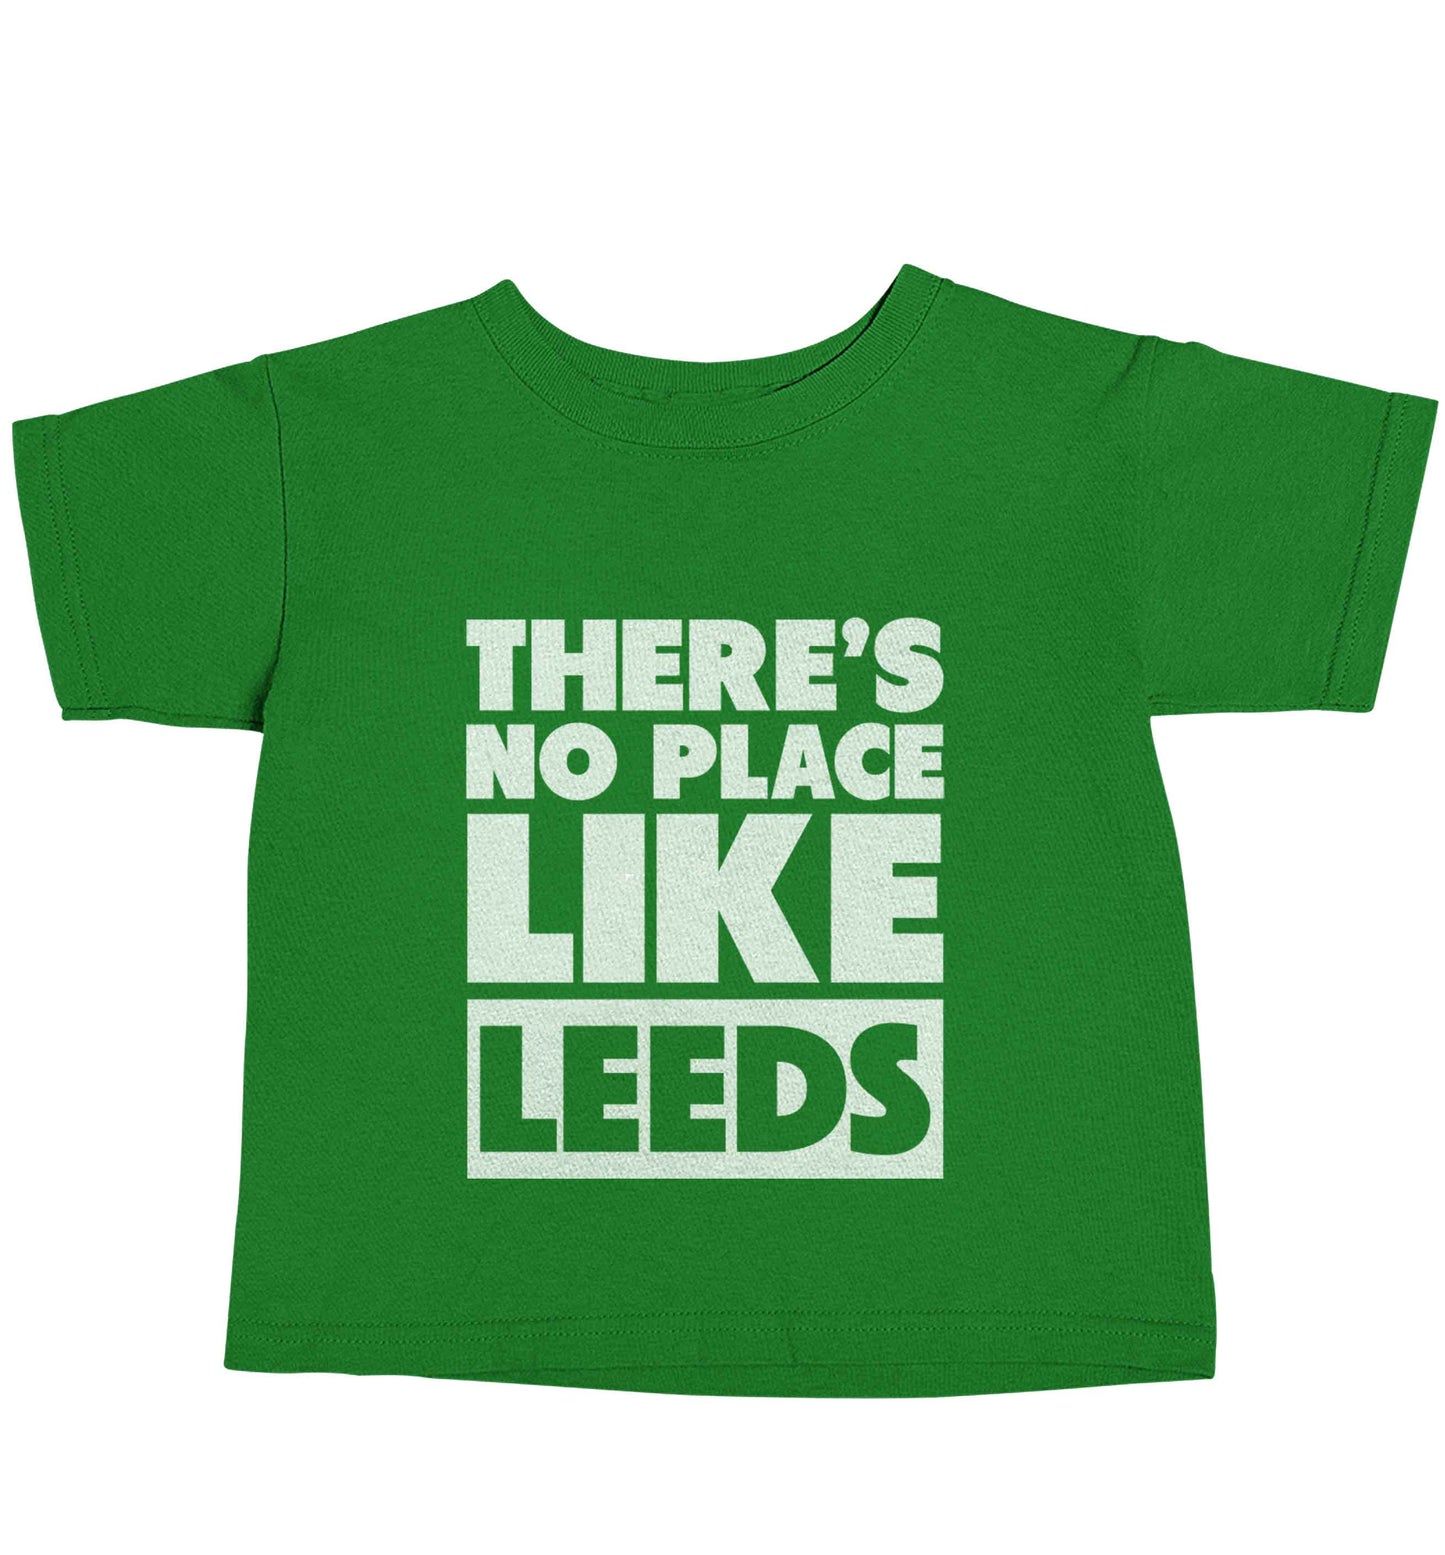 There's no place like Leeds green baby toddler Tshirt 2 Years